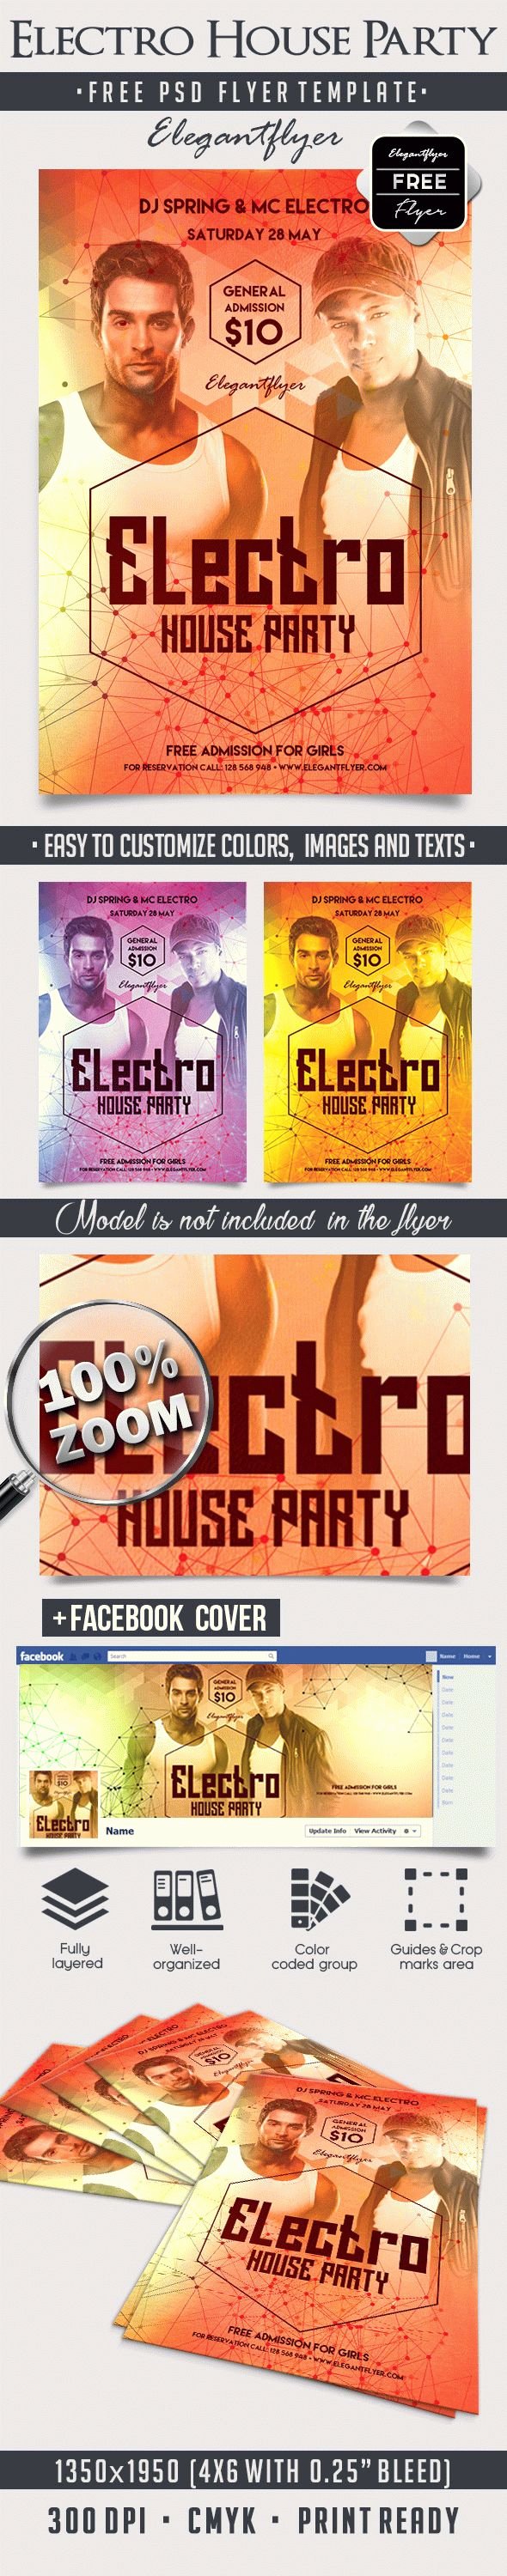 House Party Flyer Template New Electro House Party – Free Flyer Psd Template – by